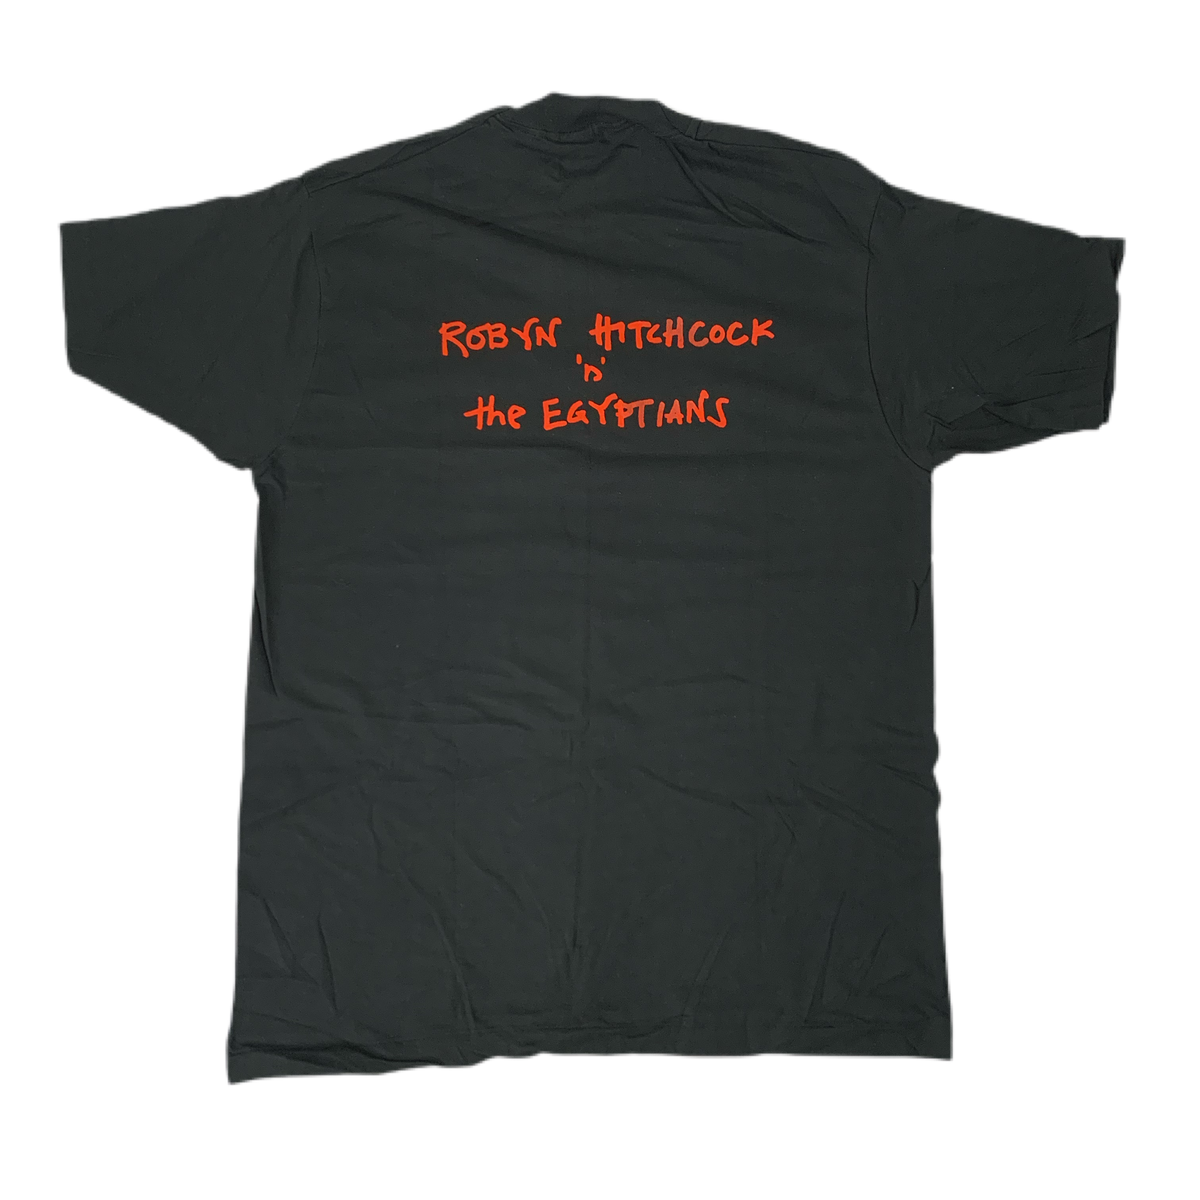 Vintage Robyn Hitchcock N’ The Egyptians “Heaven” T-Shirt